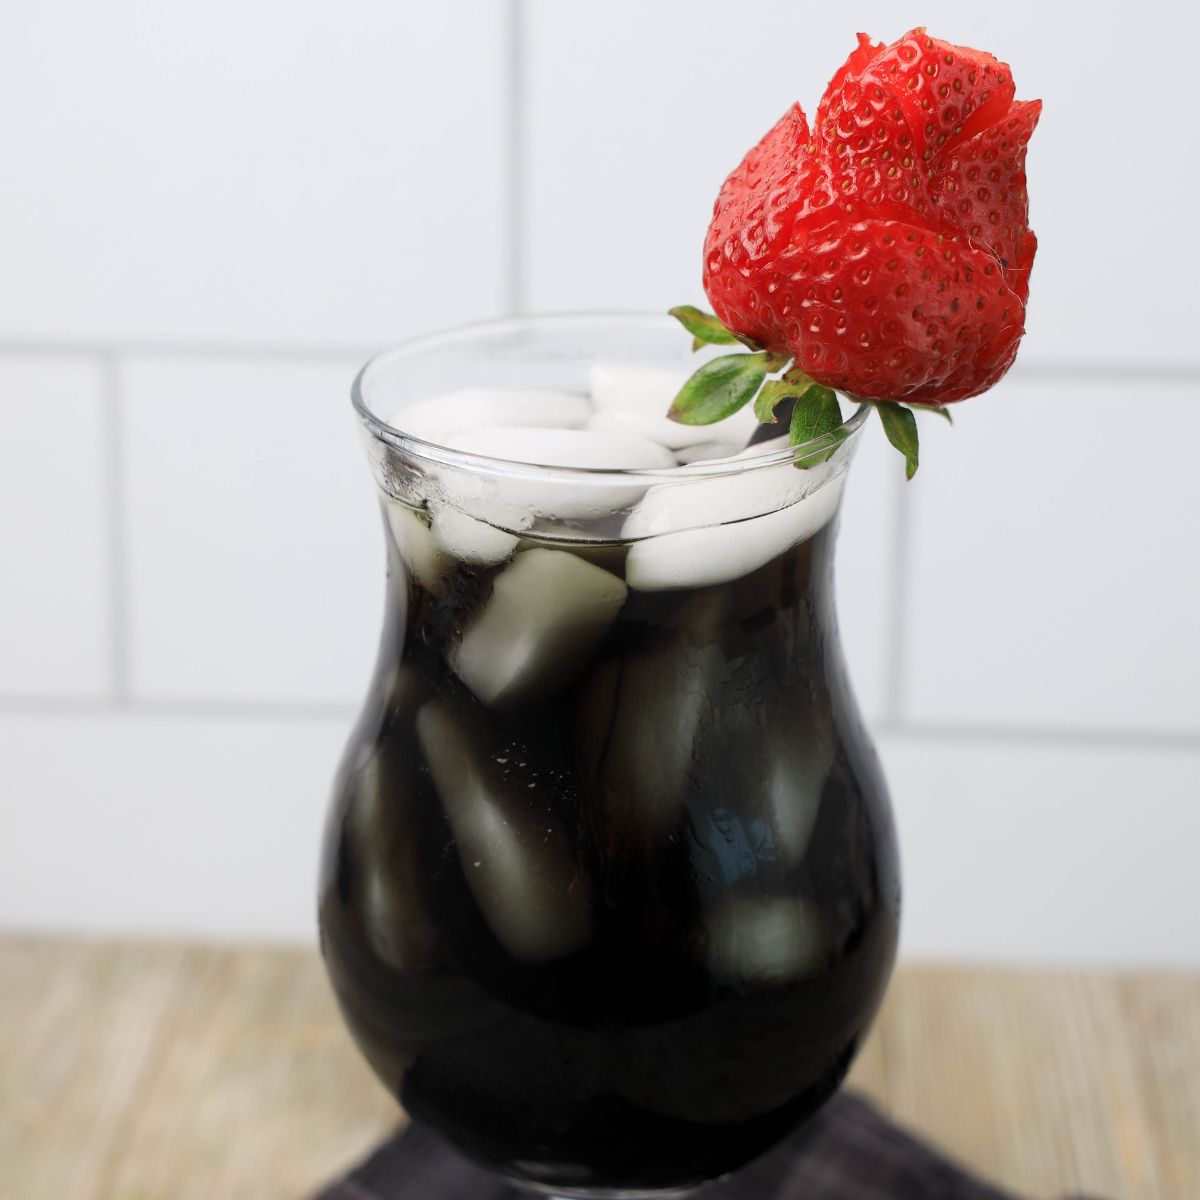 A glass of black iced tea with a strawberry on top.